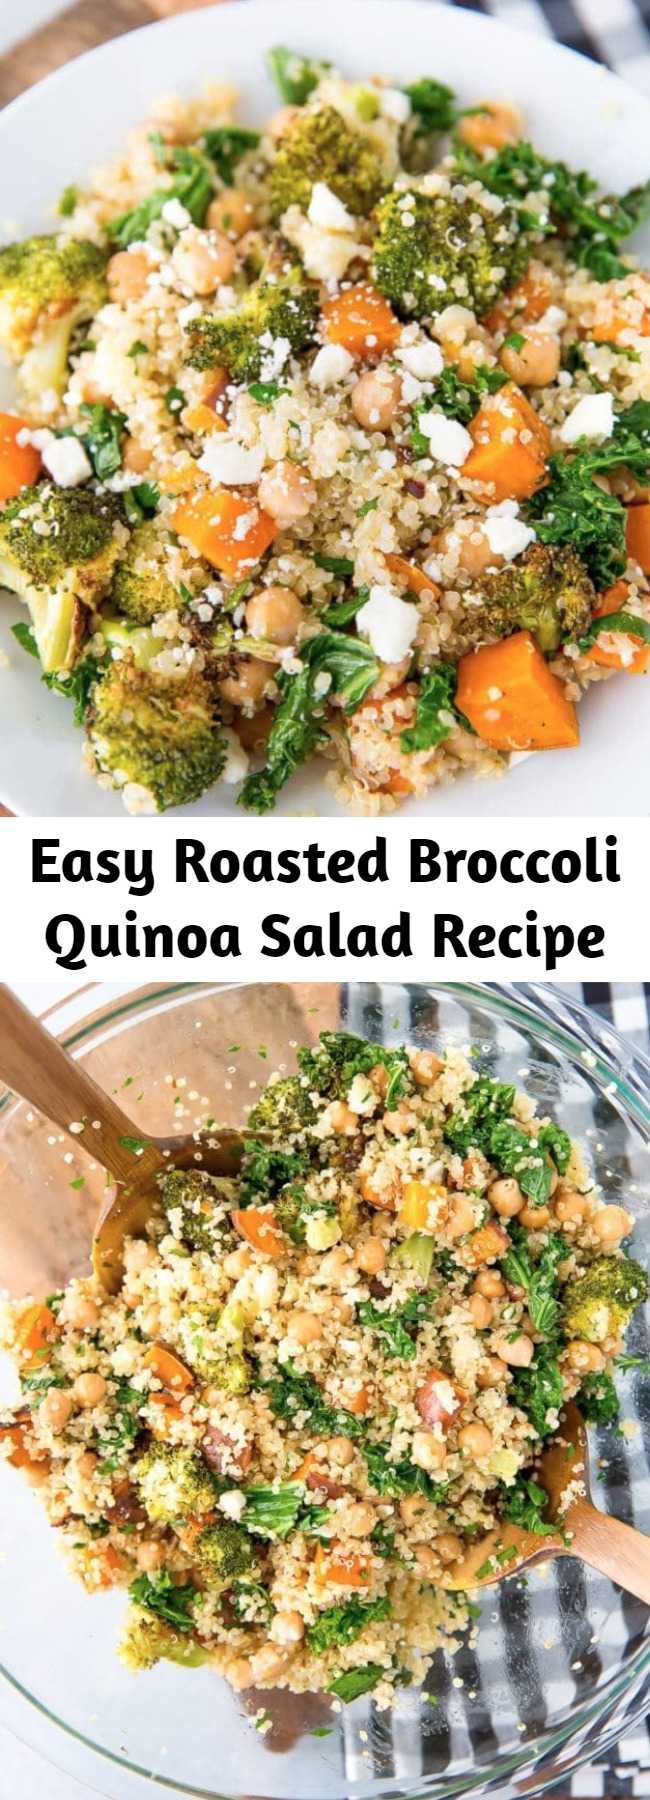 Easy Roasted Broccoli Quinoa Salad Recipe - A delicious roasted #broccoli #quinoa salad with roasted sweet potatoes, #kale and a flavorful lemon dressing. Great as a gluten-free #vegetarian main! #glutenfree